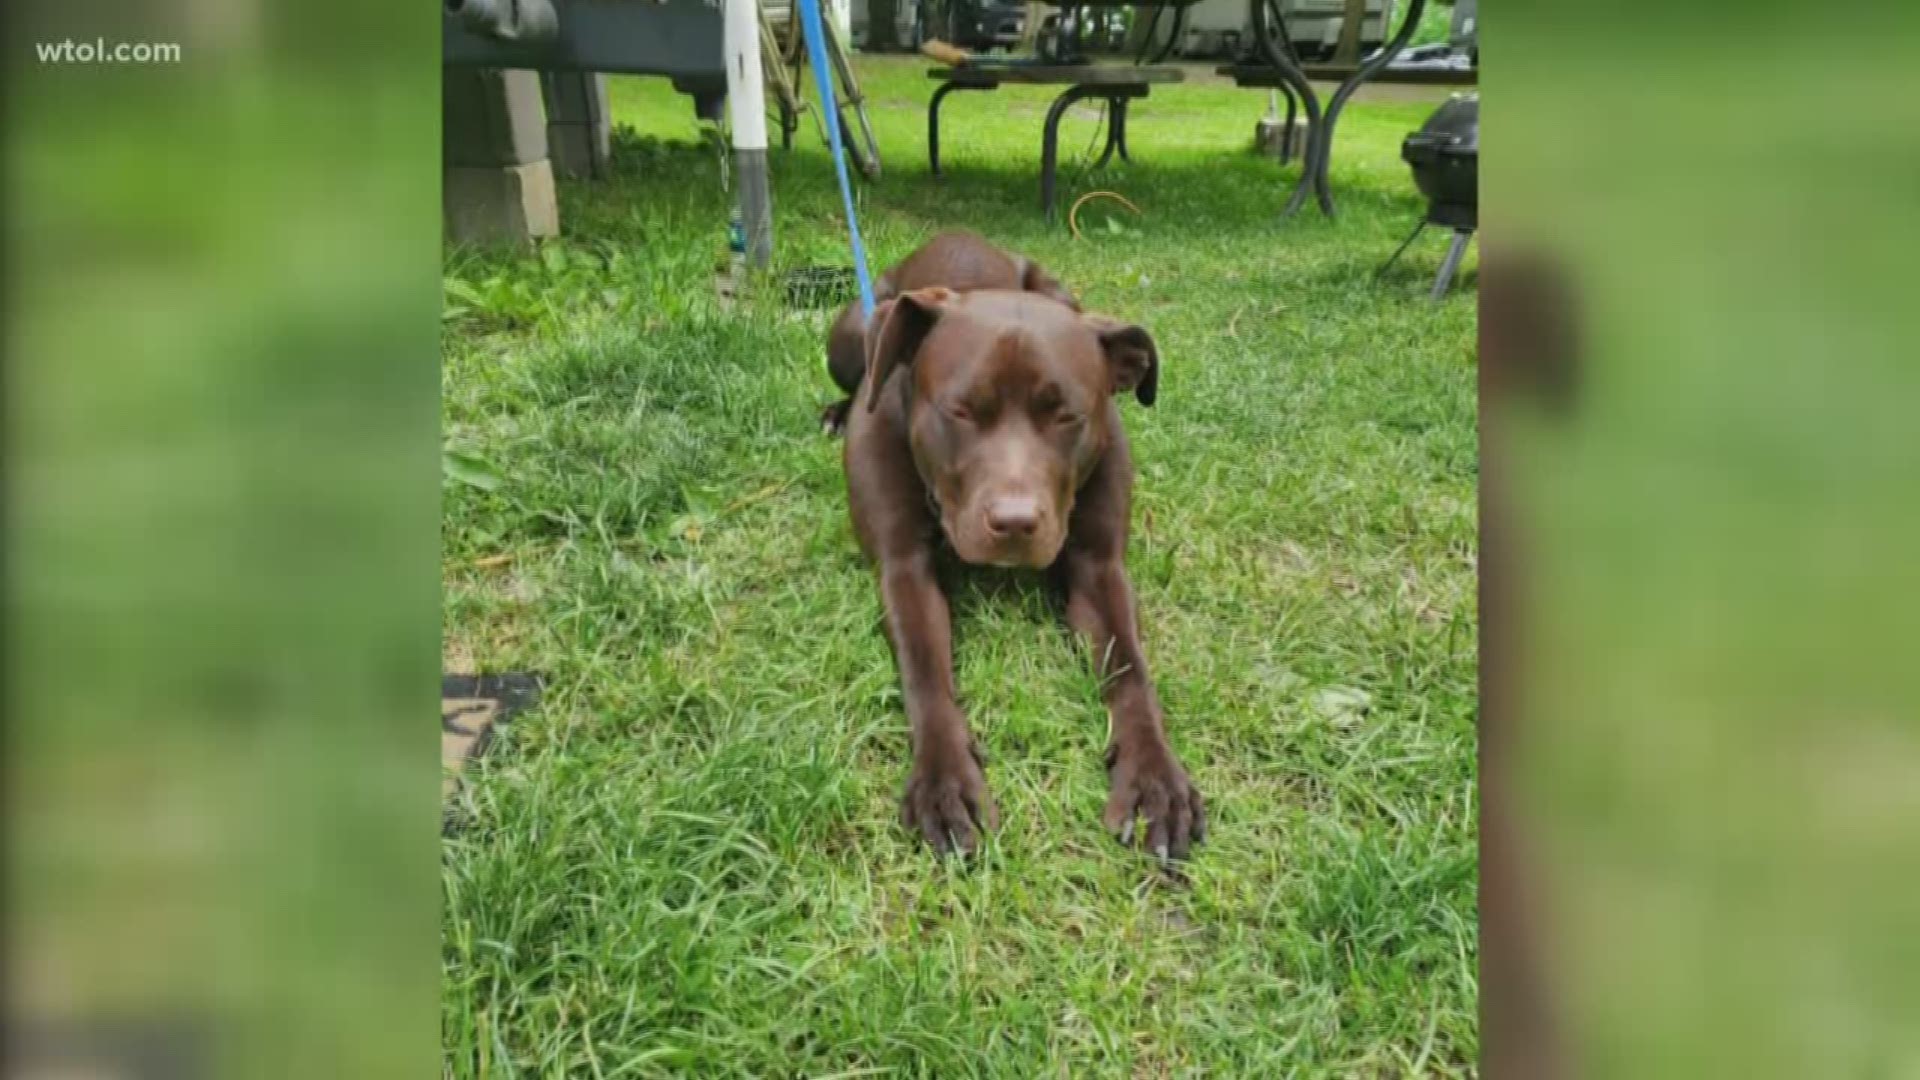 Heather Liechty says she was misled into surrendering her dog after her landlord demanded she remove the pit bull following an incident on the property.